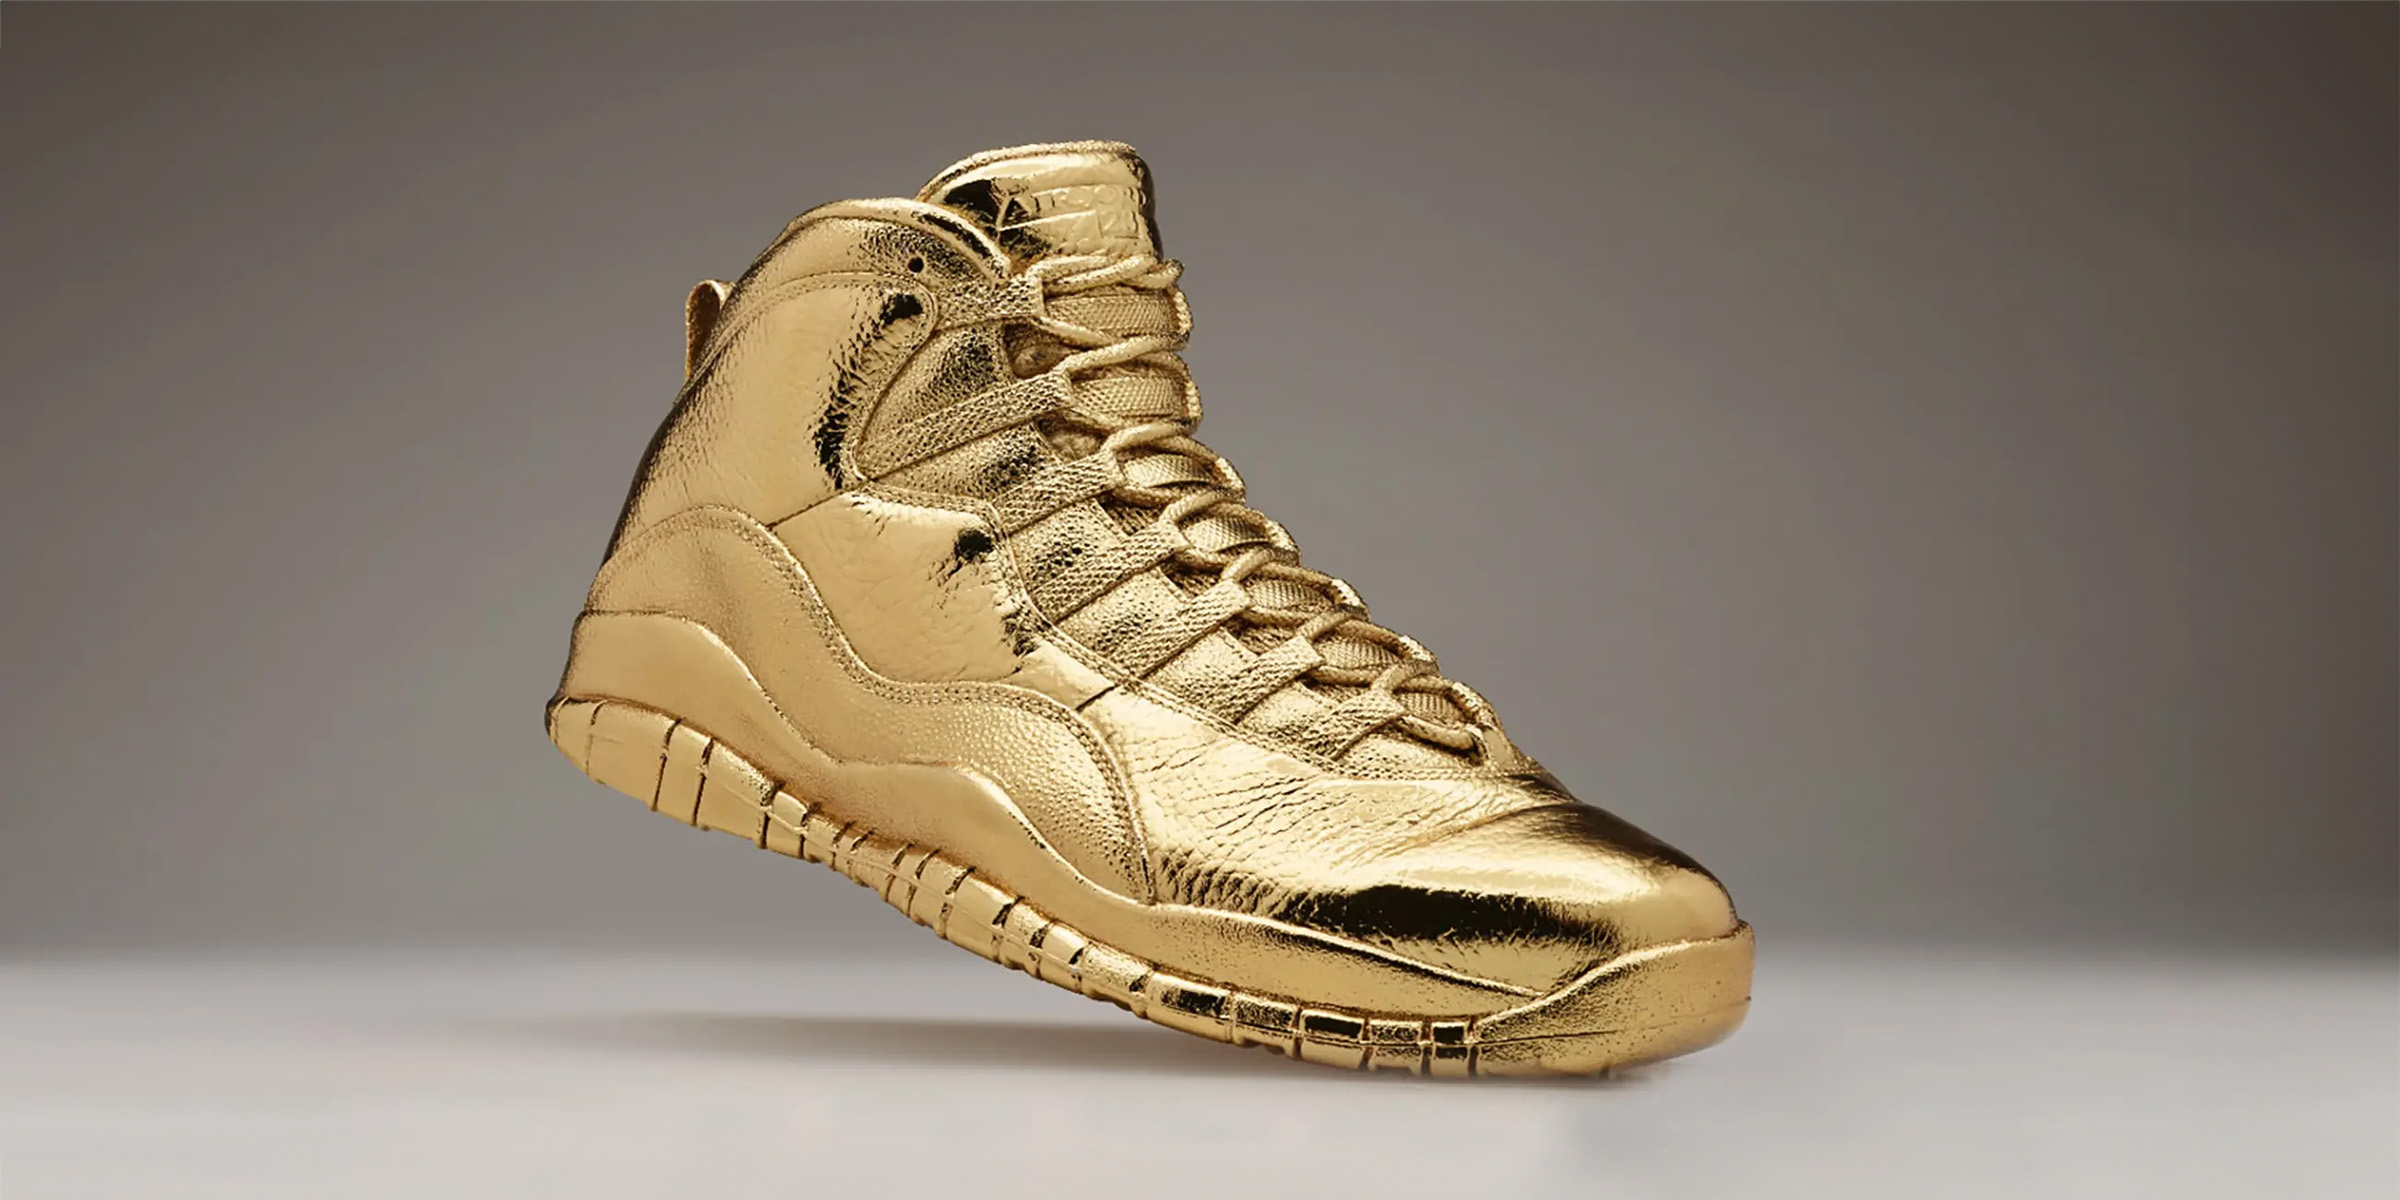 High Kicks Meet High Fashion: The Most Expensive Sneakers Of All Time